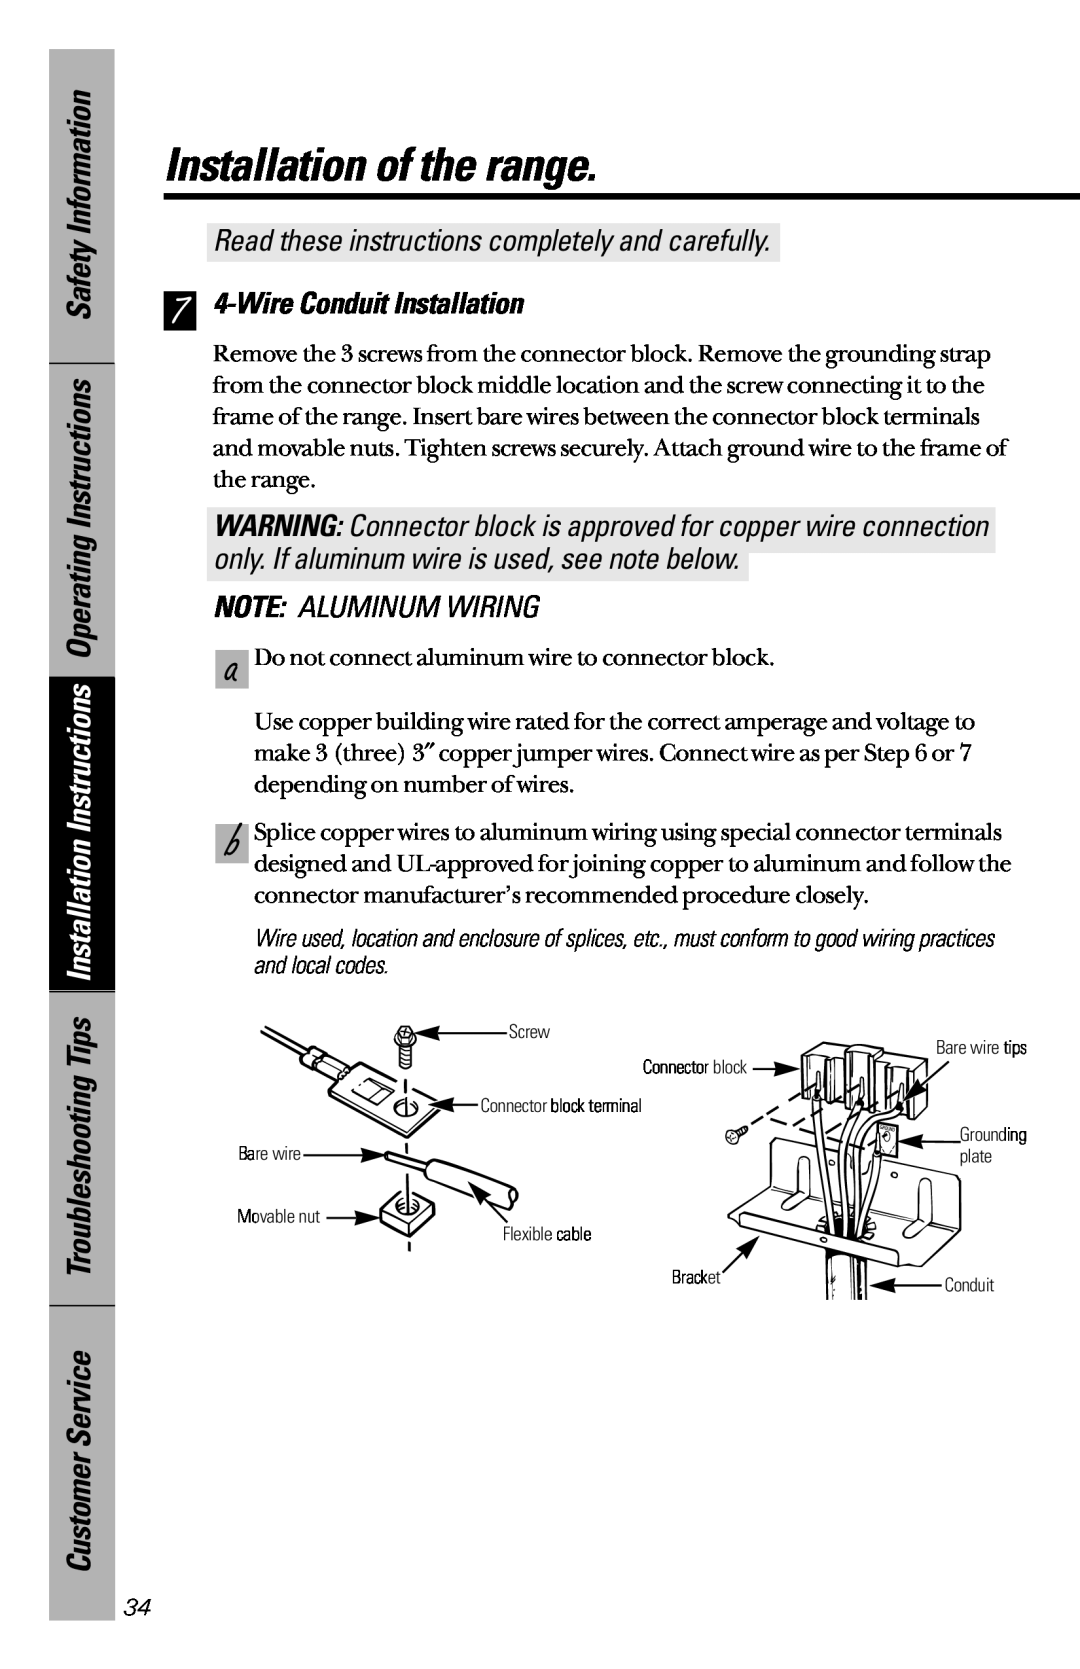 Hotpoint RB525 7 4-Wire Conduit Installation, Installation of the range, Read these instructions completely and carefully 